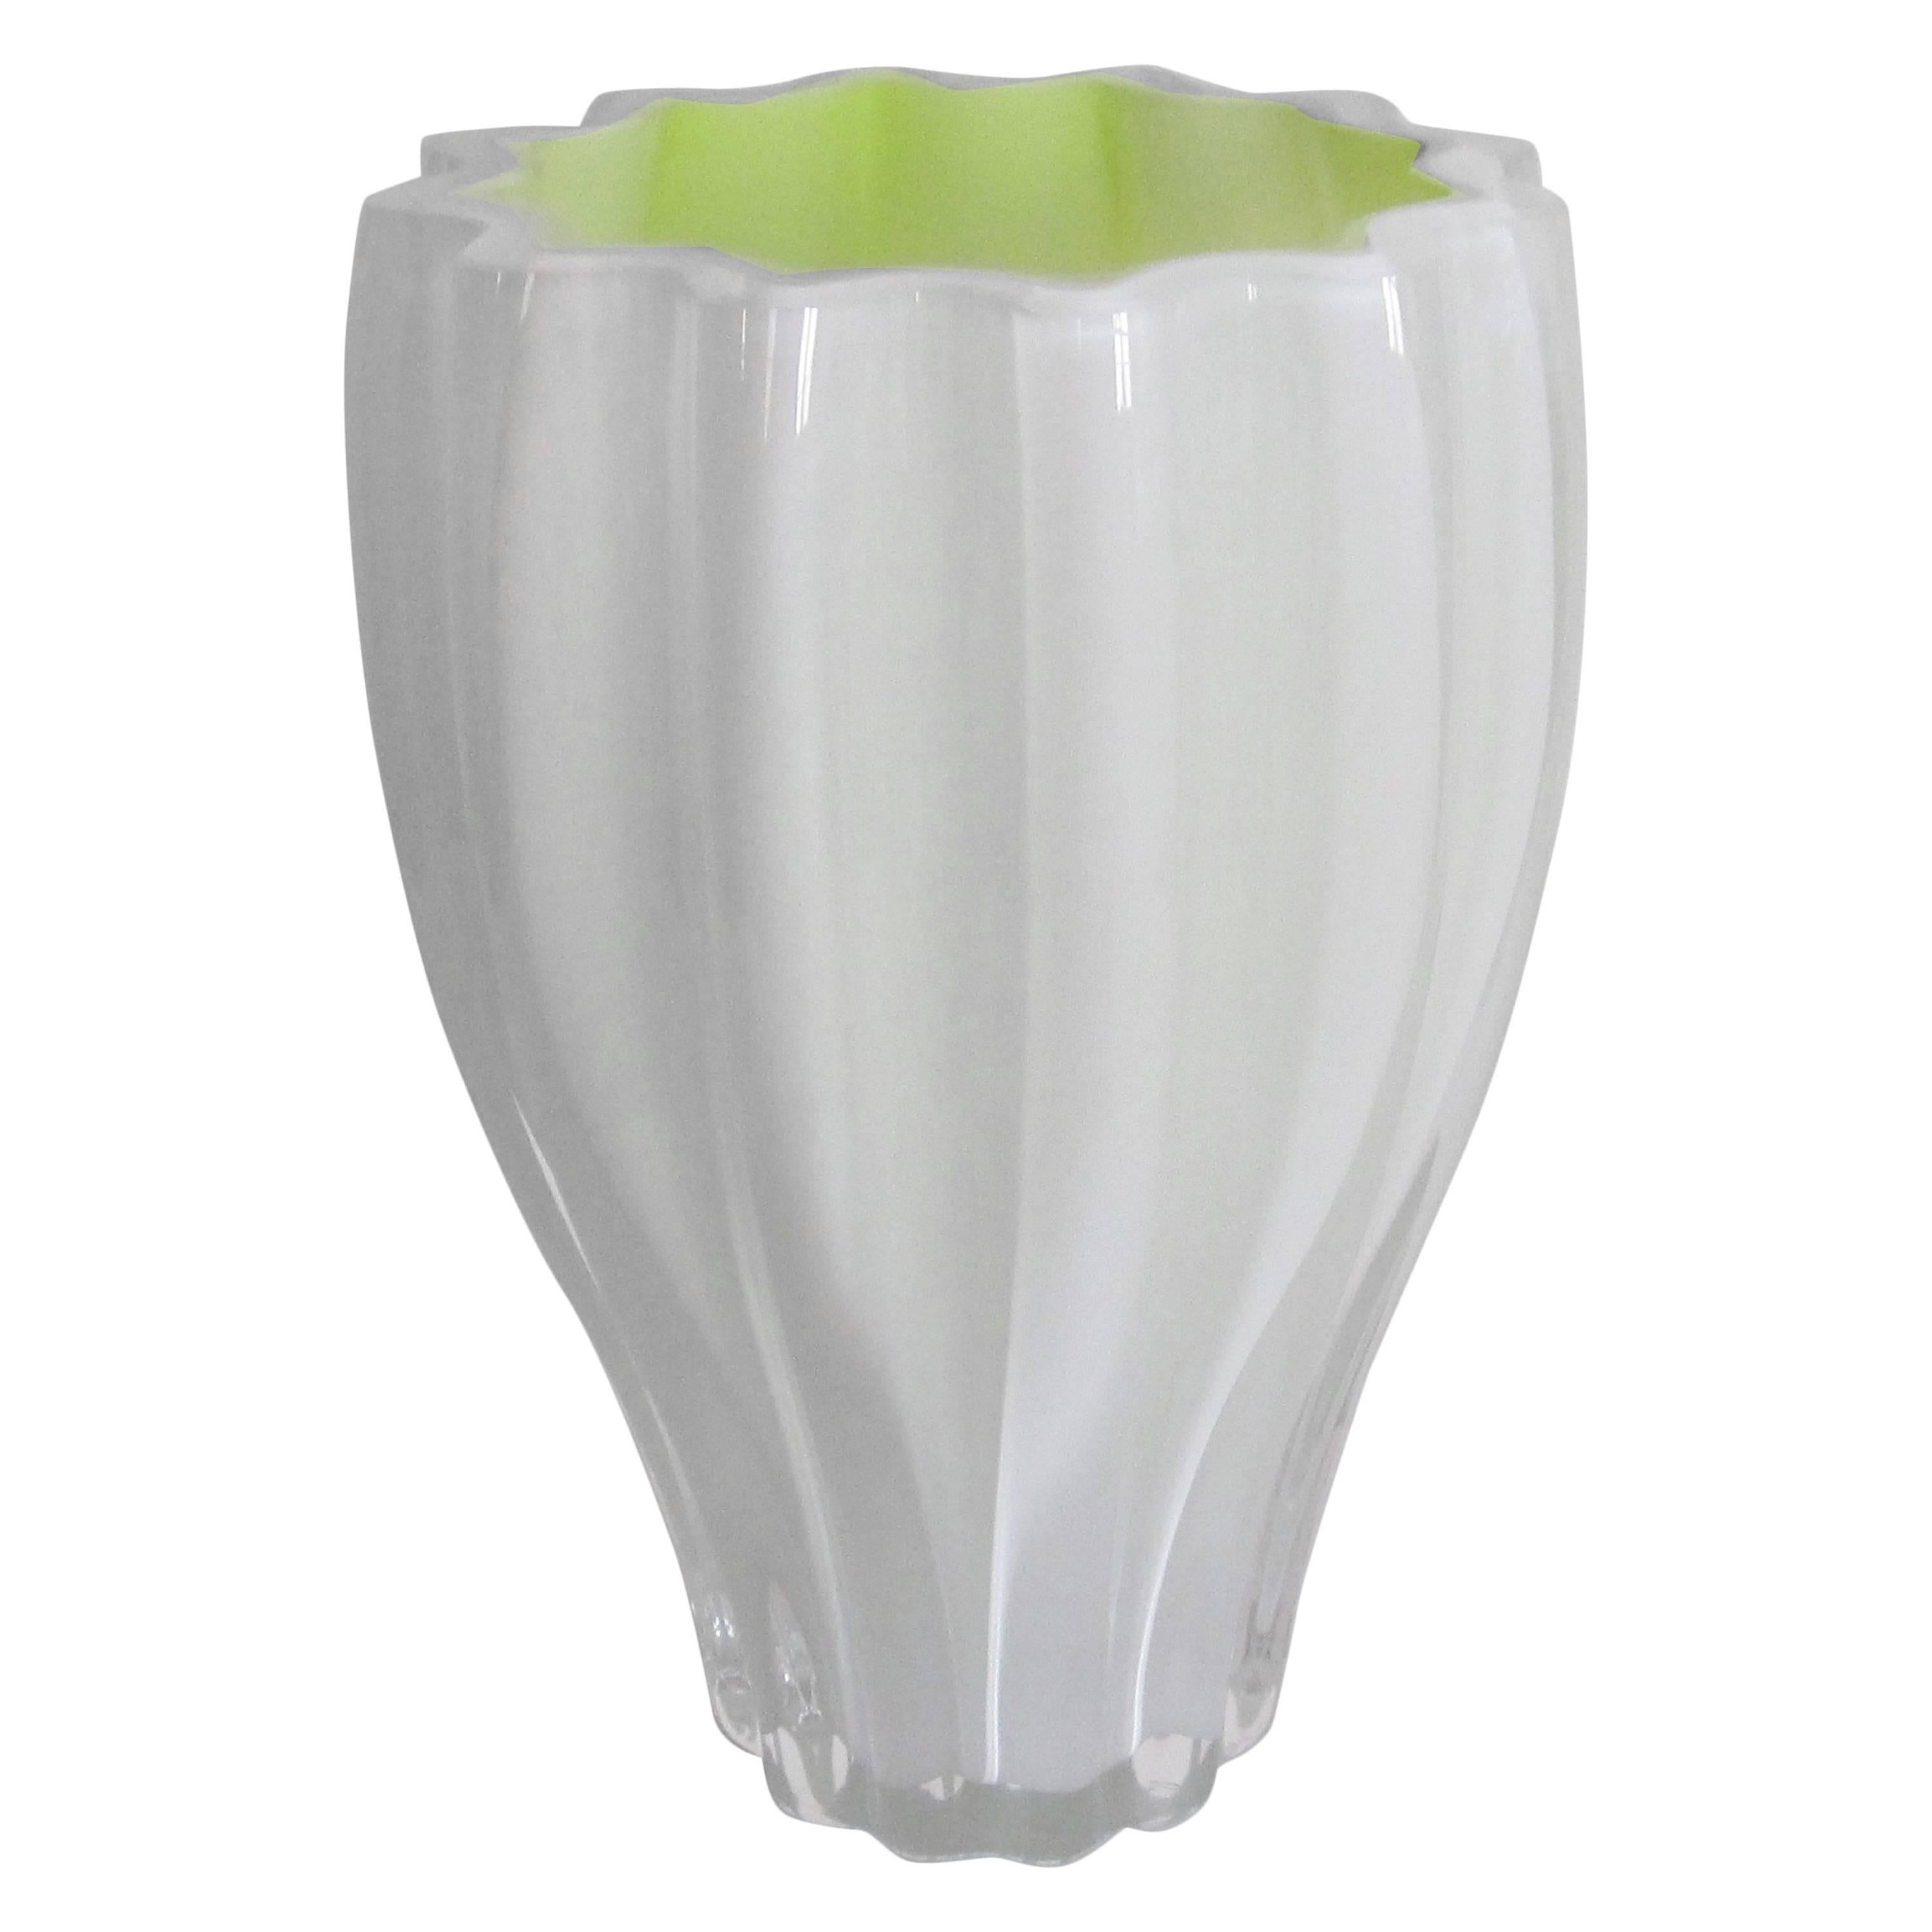 Postmodern White and Neon Yellow Art Glass Vase from Sweden